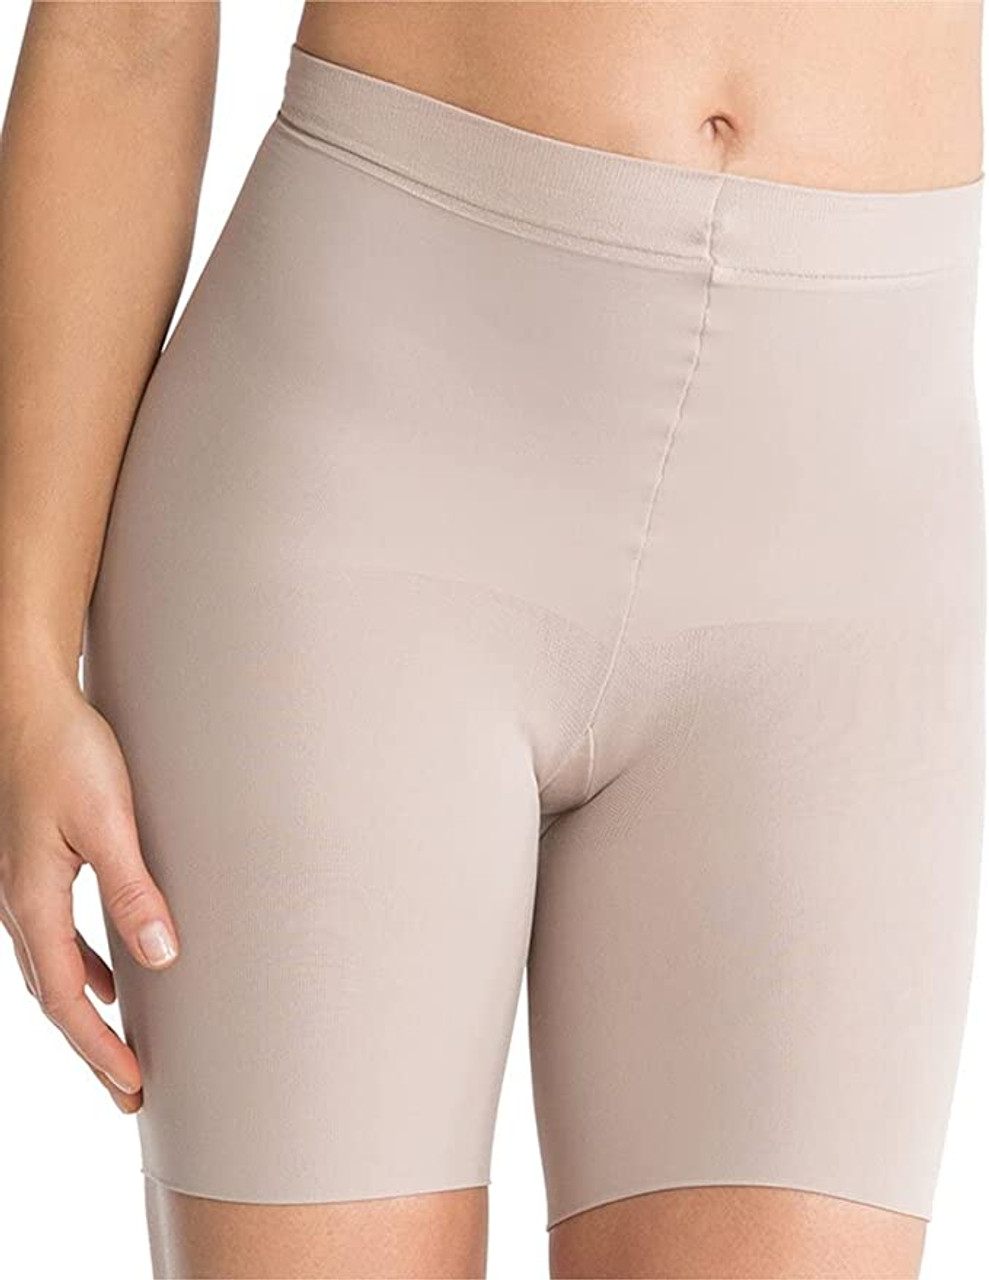 SPANX In-Power Line Firm Control Power Panties & Reviews